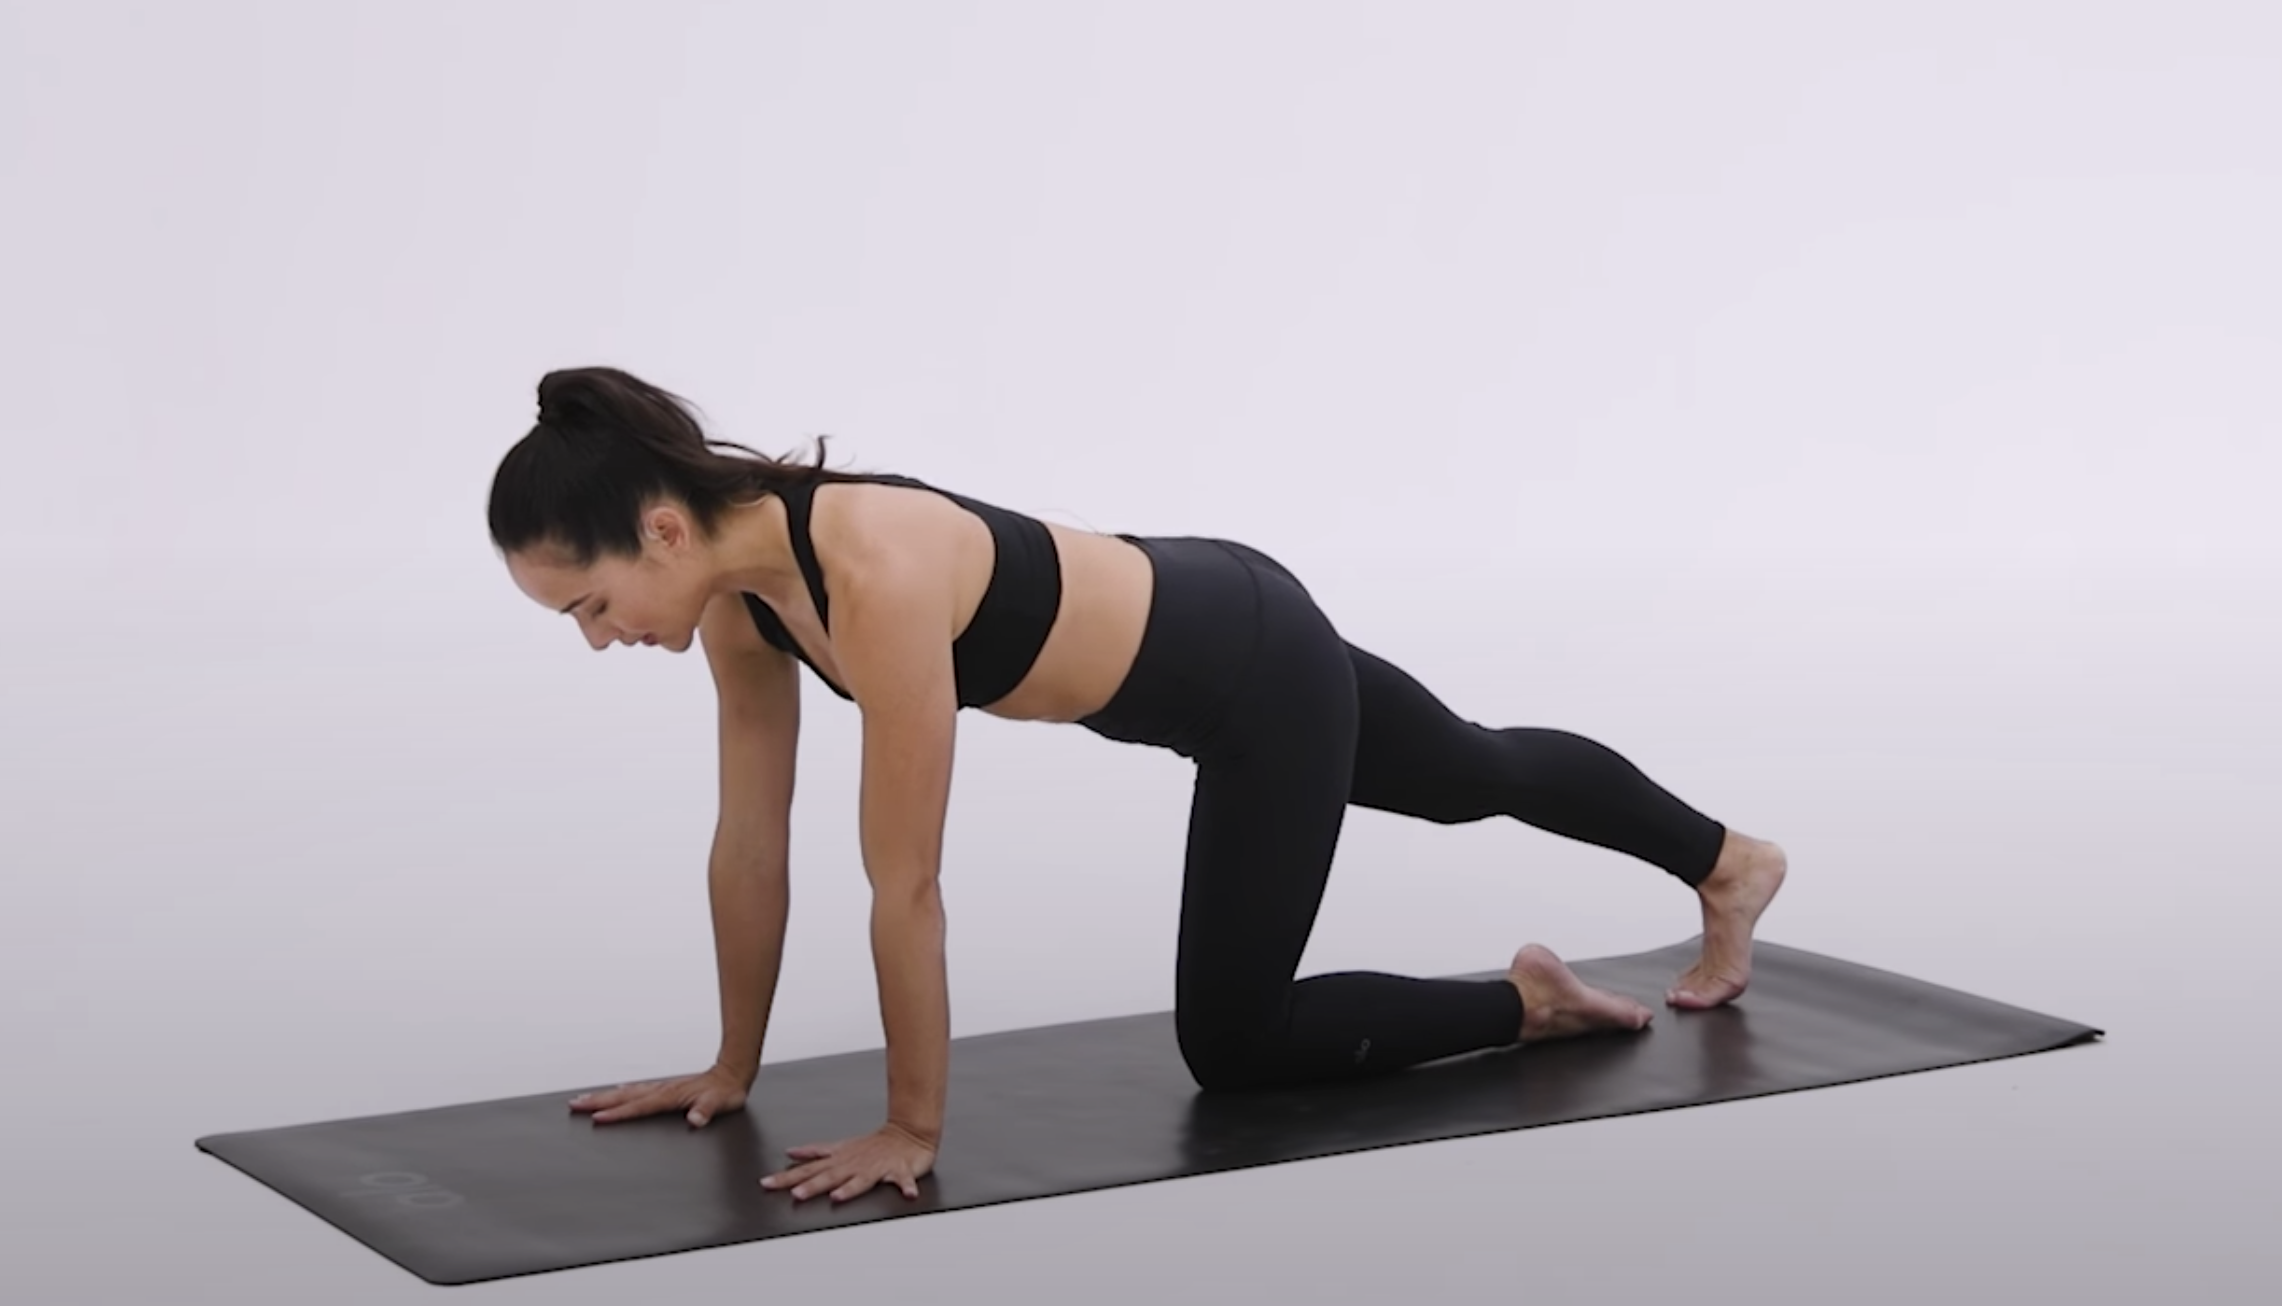 How to Strengthen Your Chaturanga — Alo Moves